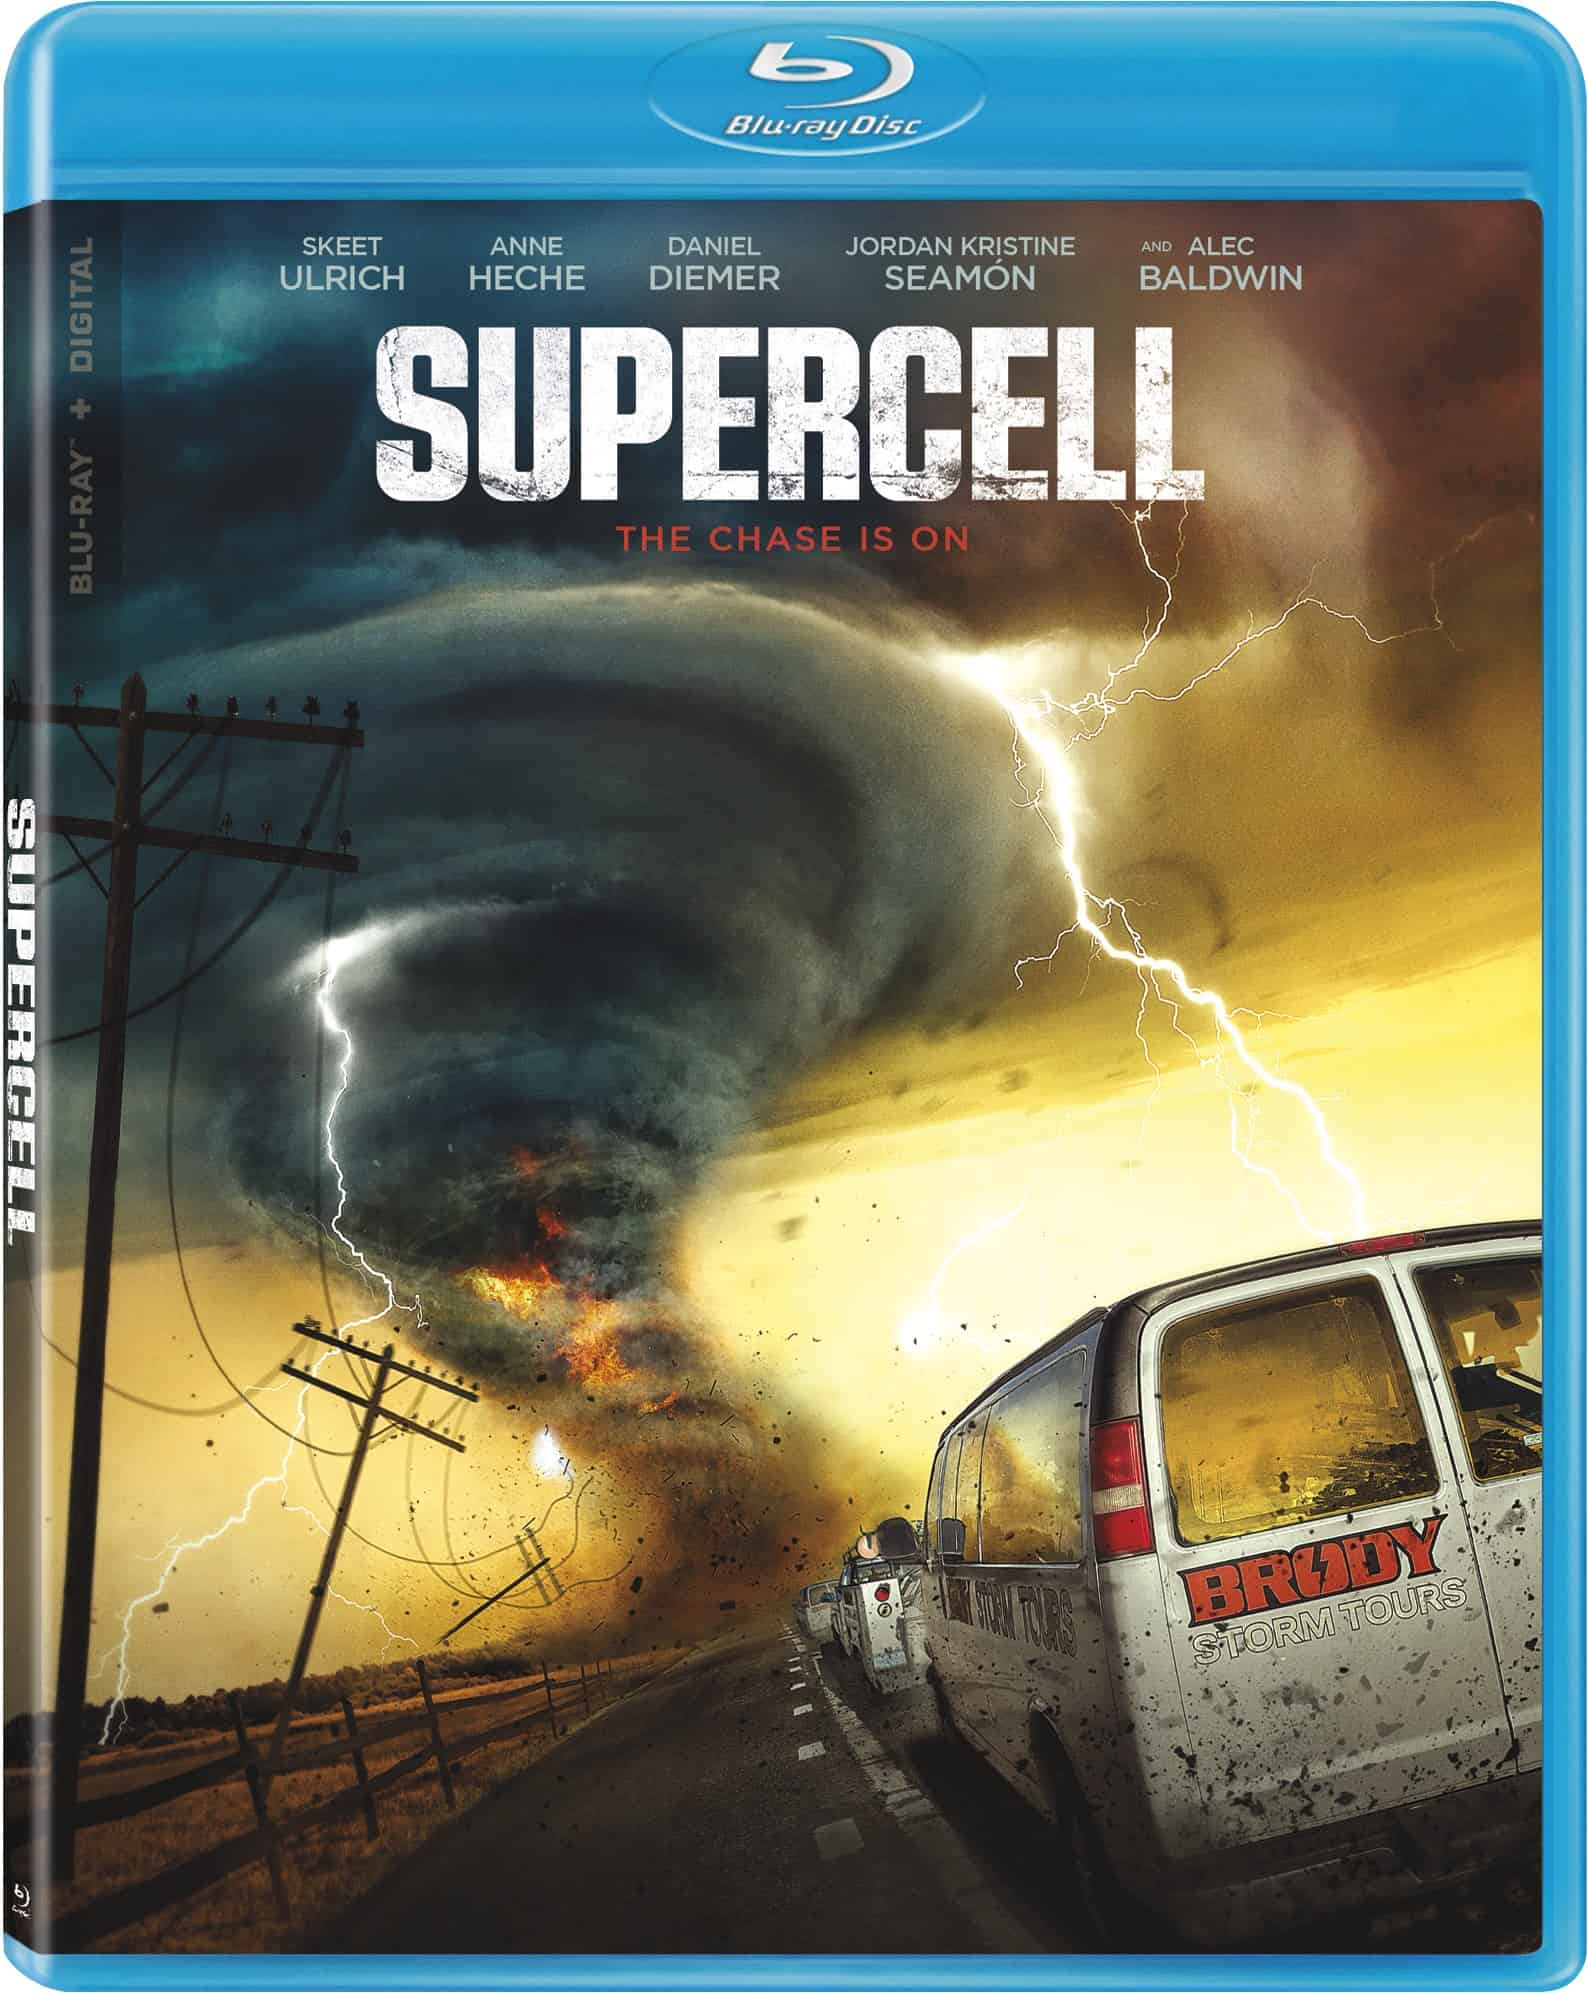 Supercell comes to Blu-ray on May 2nd 23